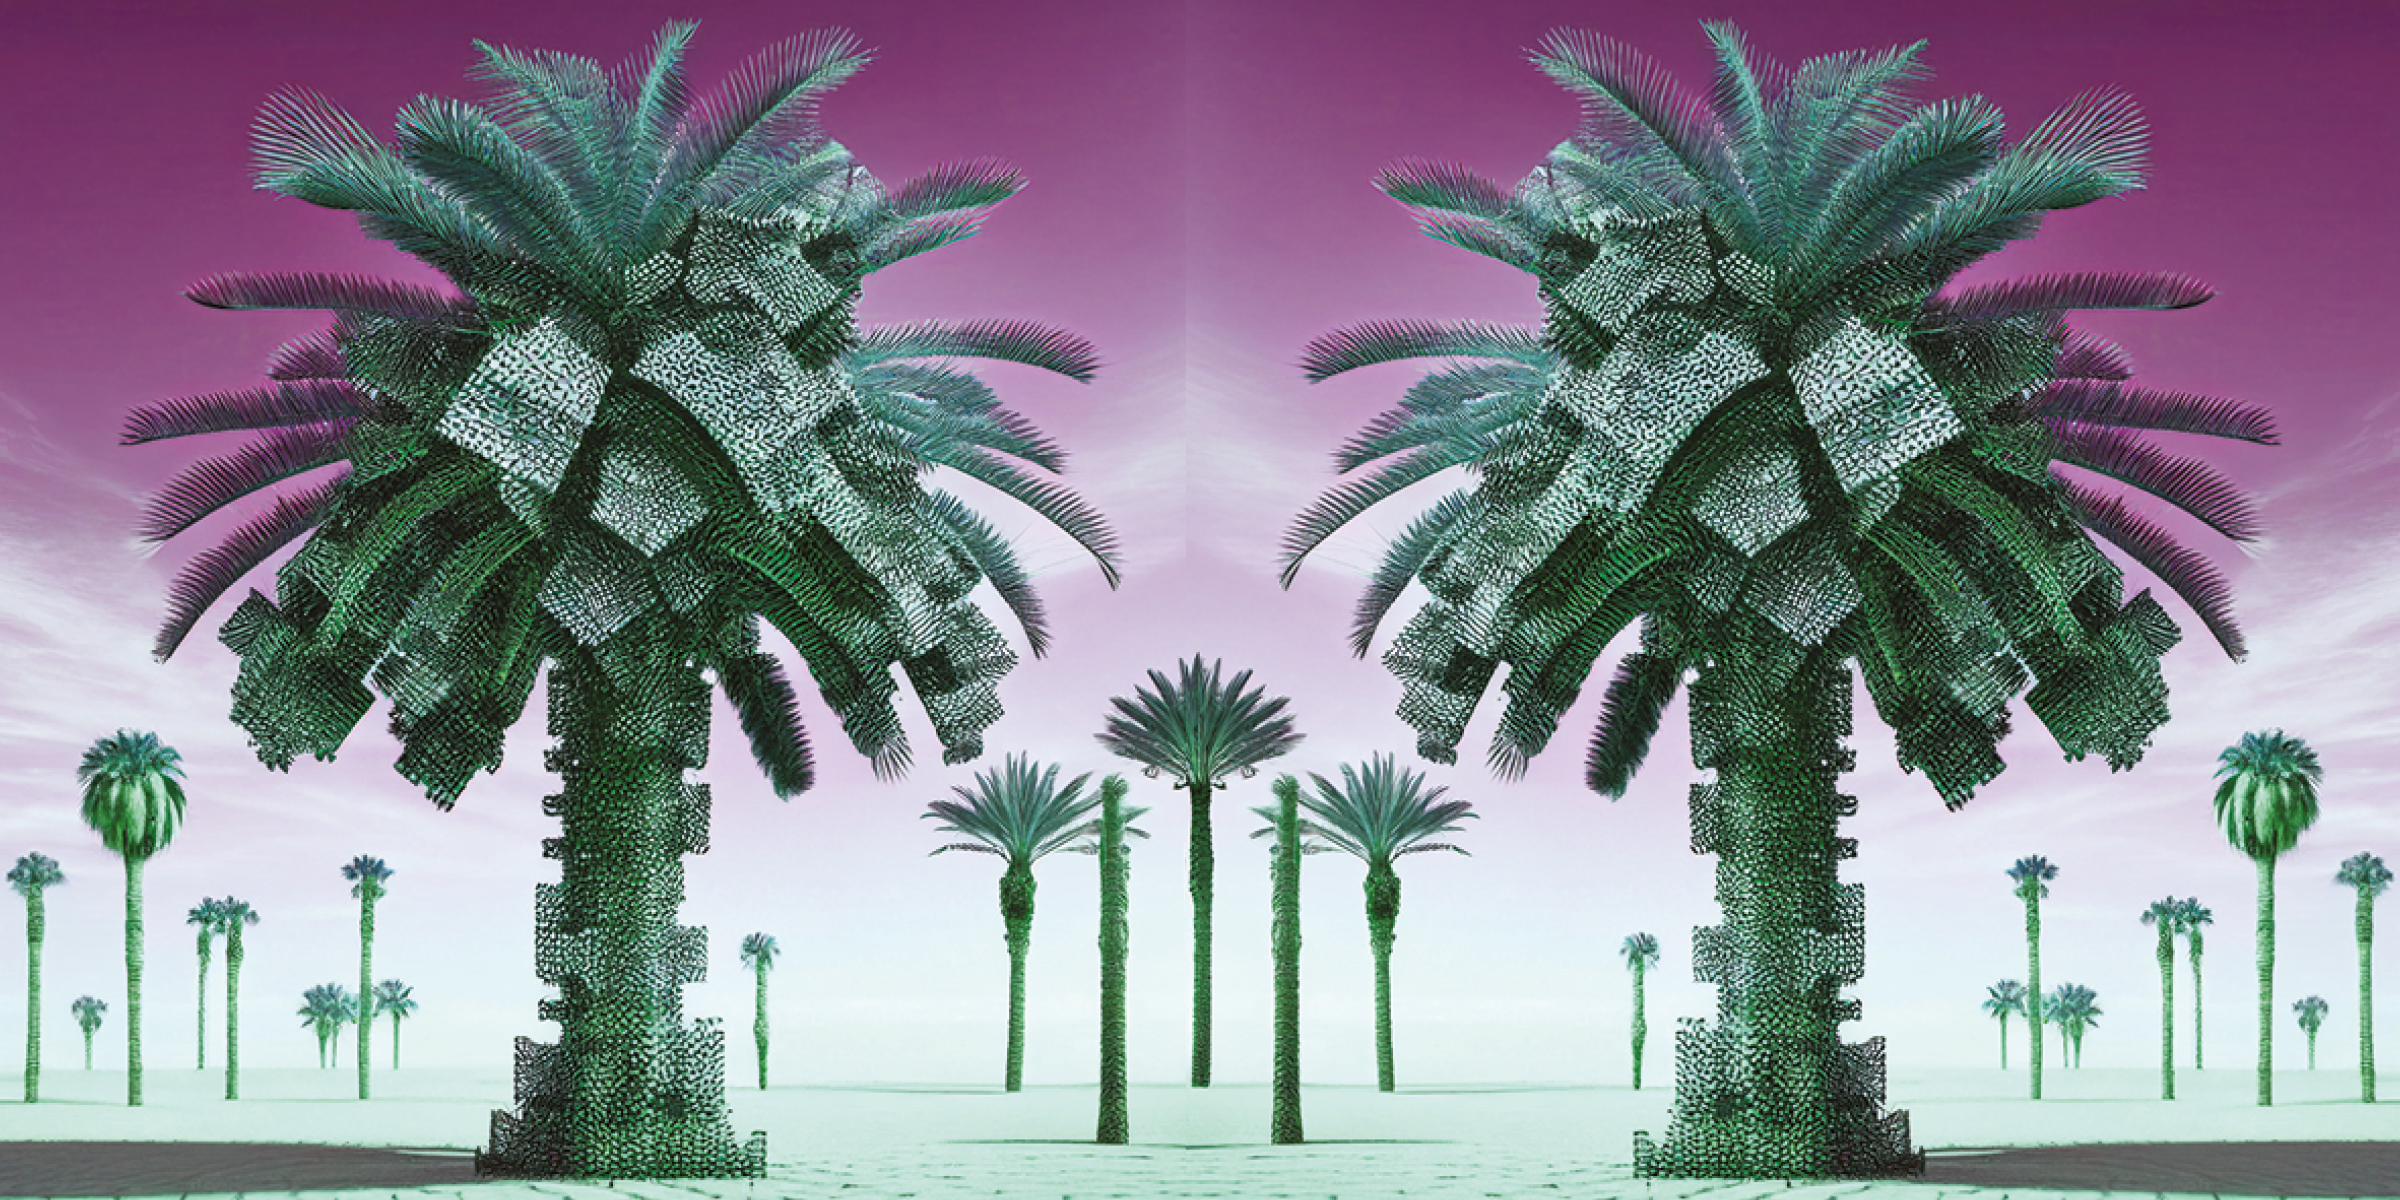 abstract image of green palm trees with purple background | ESG